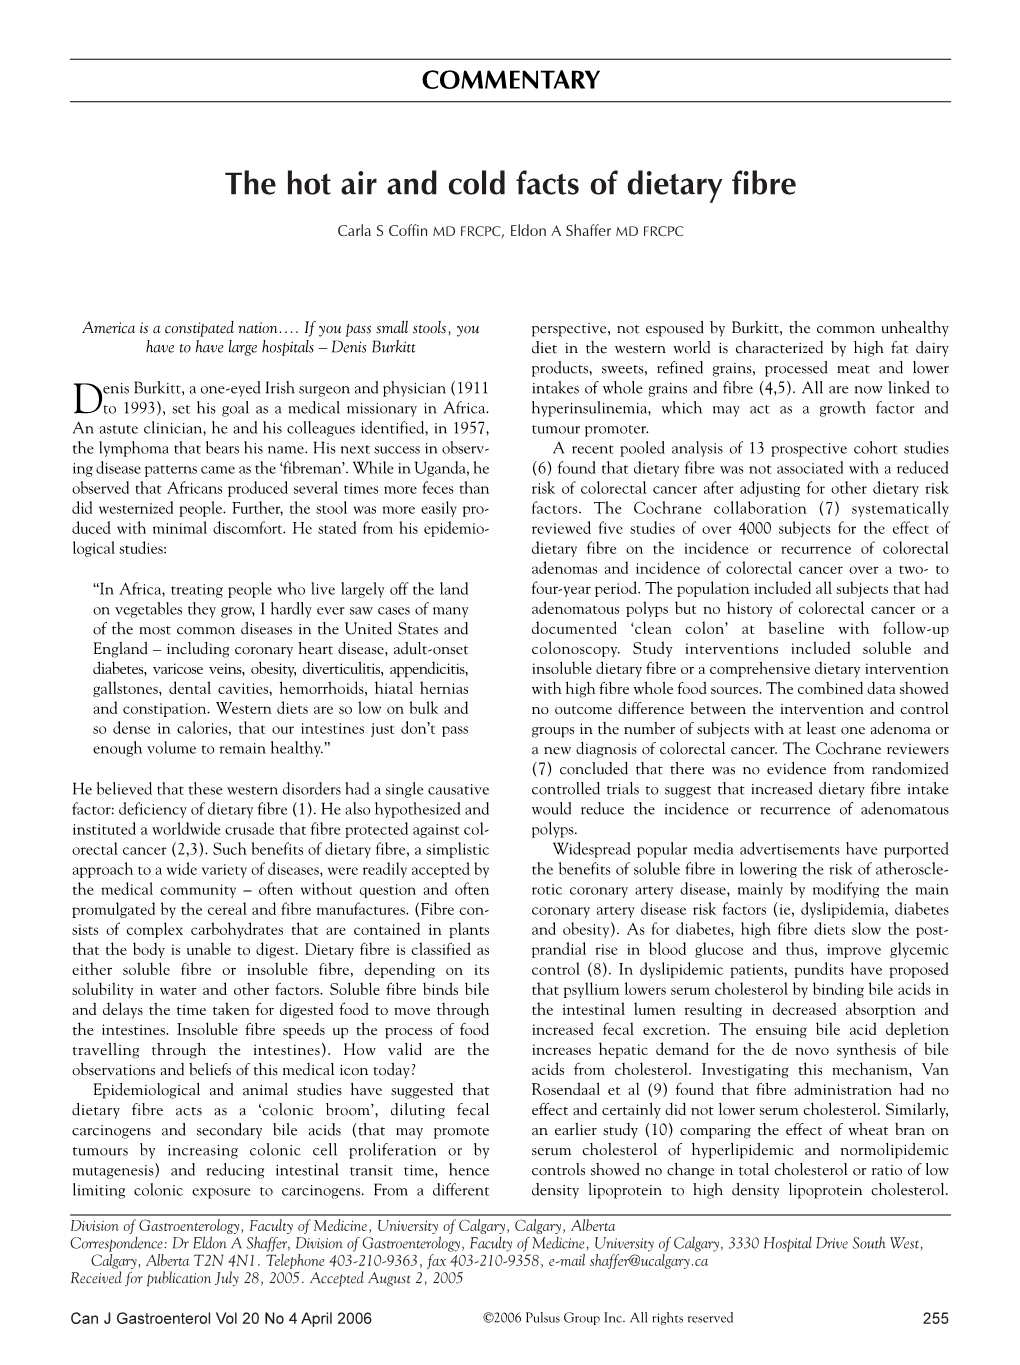 The Hot Air and Cold Facts of Dietary Fibre